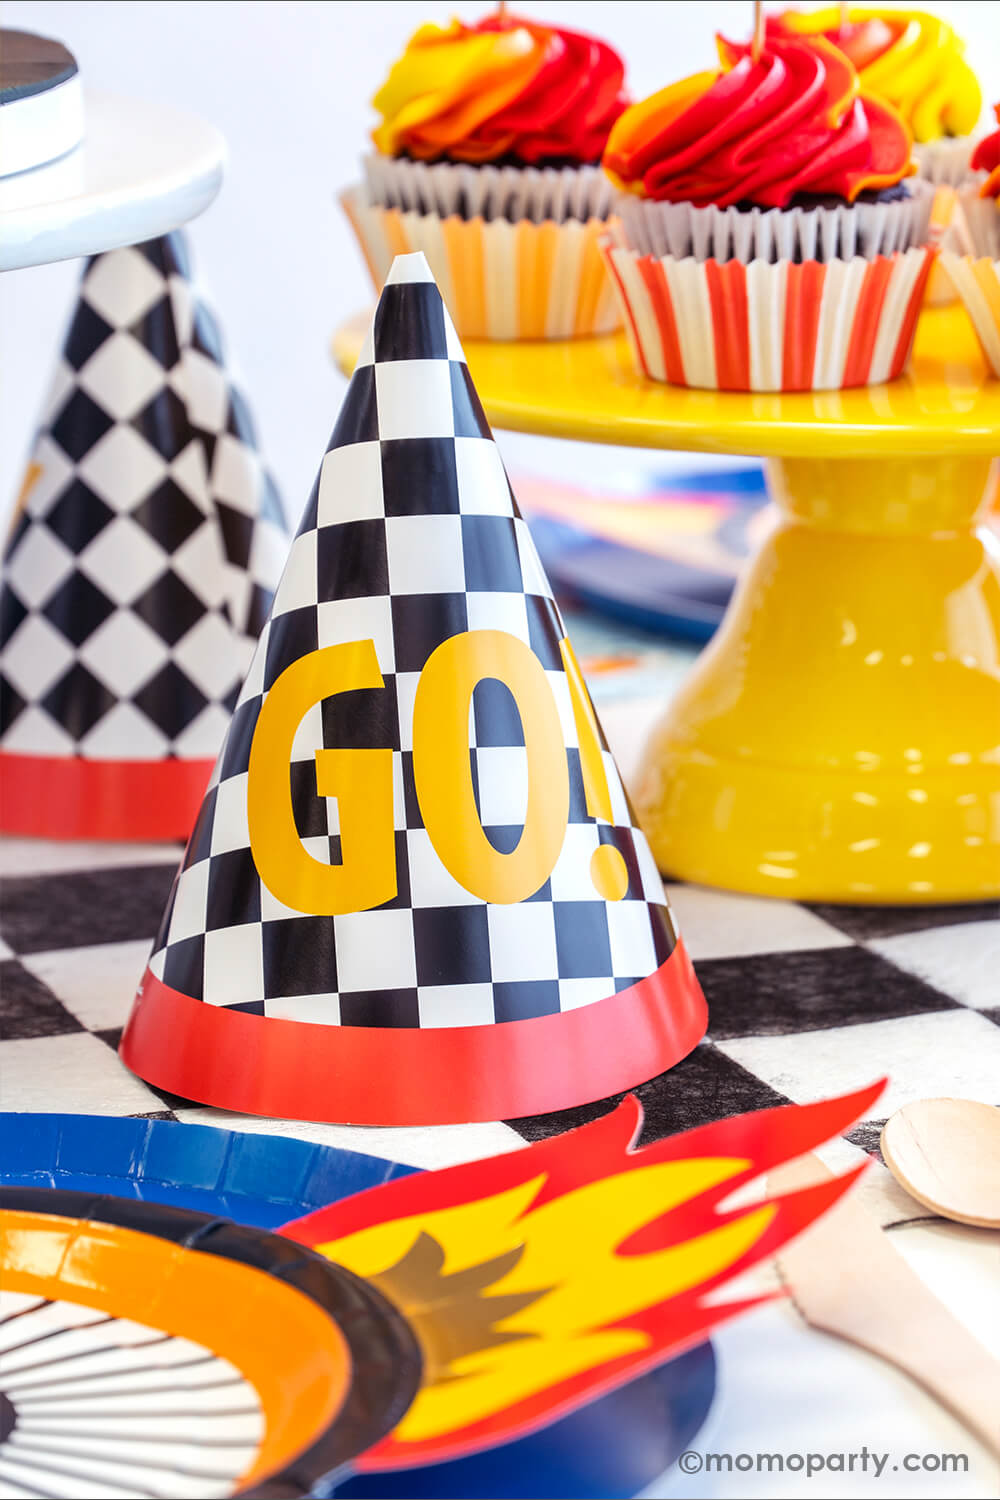 Momo Party checkred GO! birthday hats next to red and yellow swirl cupcakes in a Hot Wheels themed birthday party where there's wheel shaped plates with flame on them along with midnight blue dinner plates.